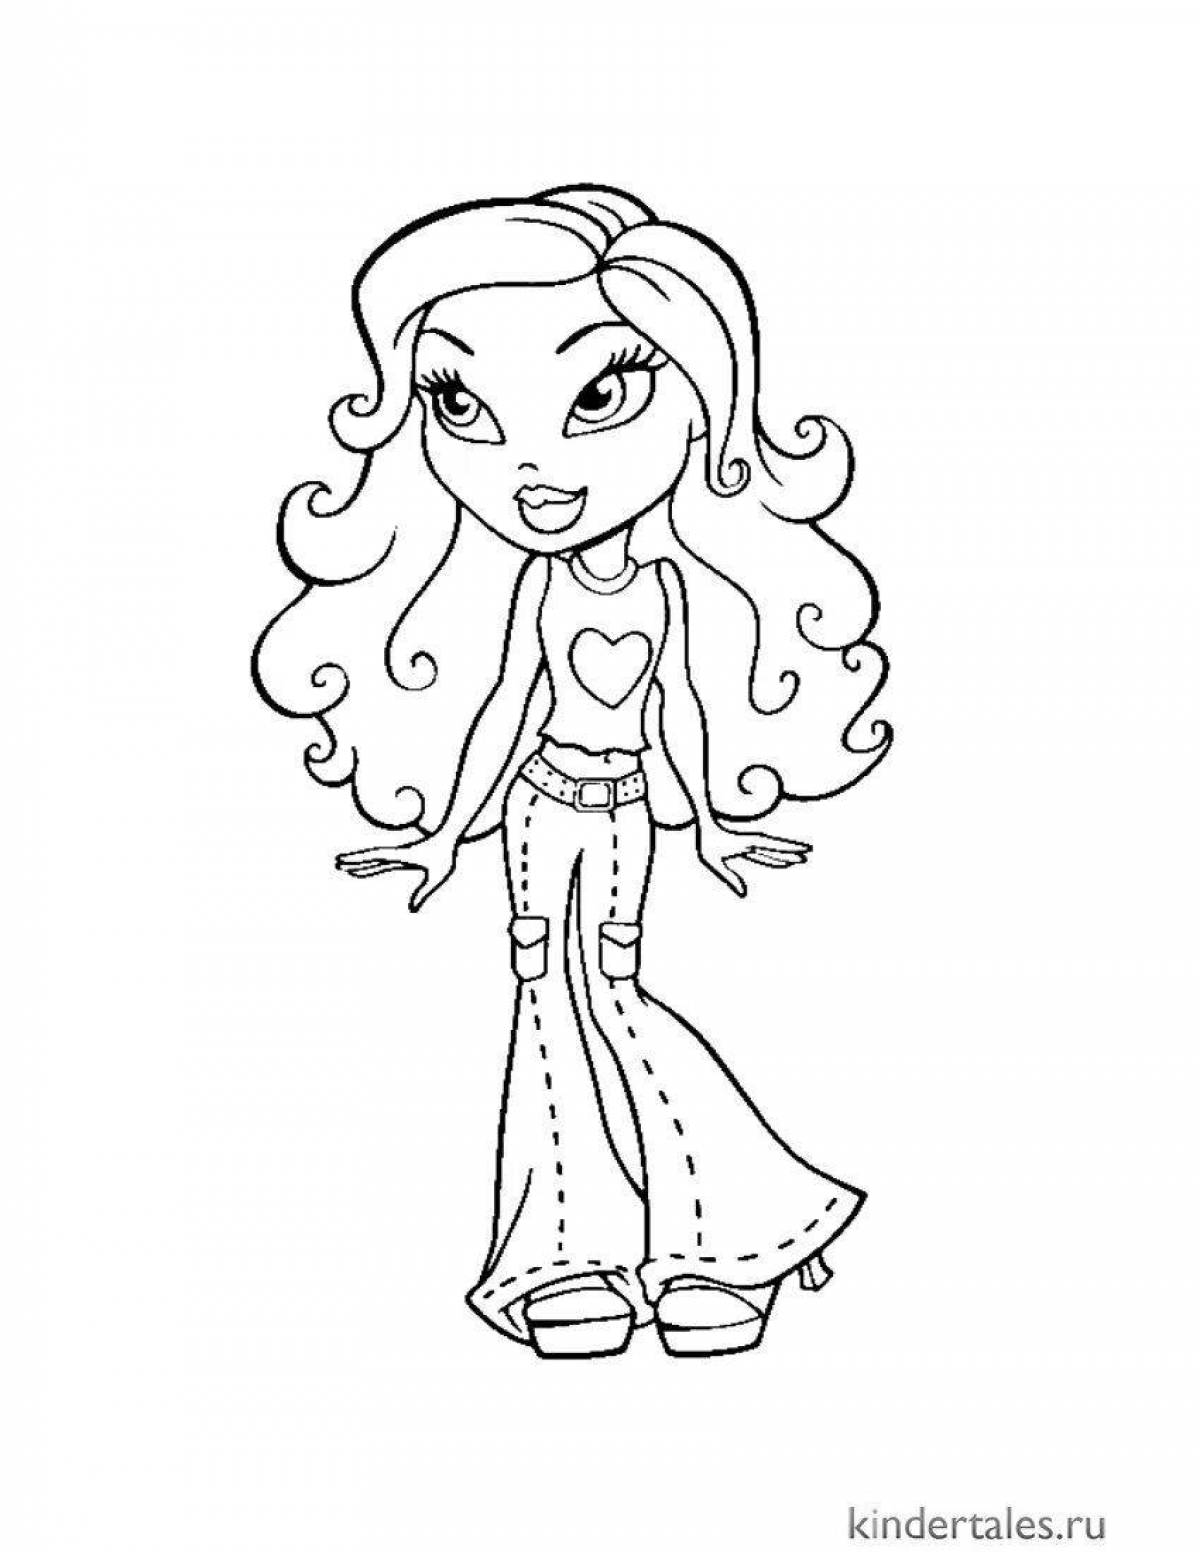 Colorful fashionista coloring pages